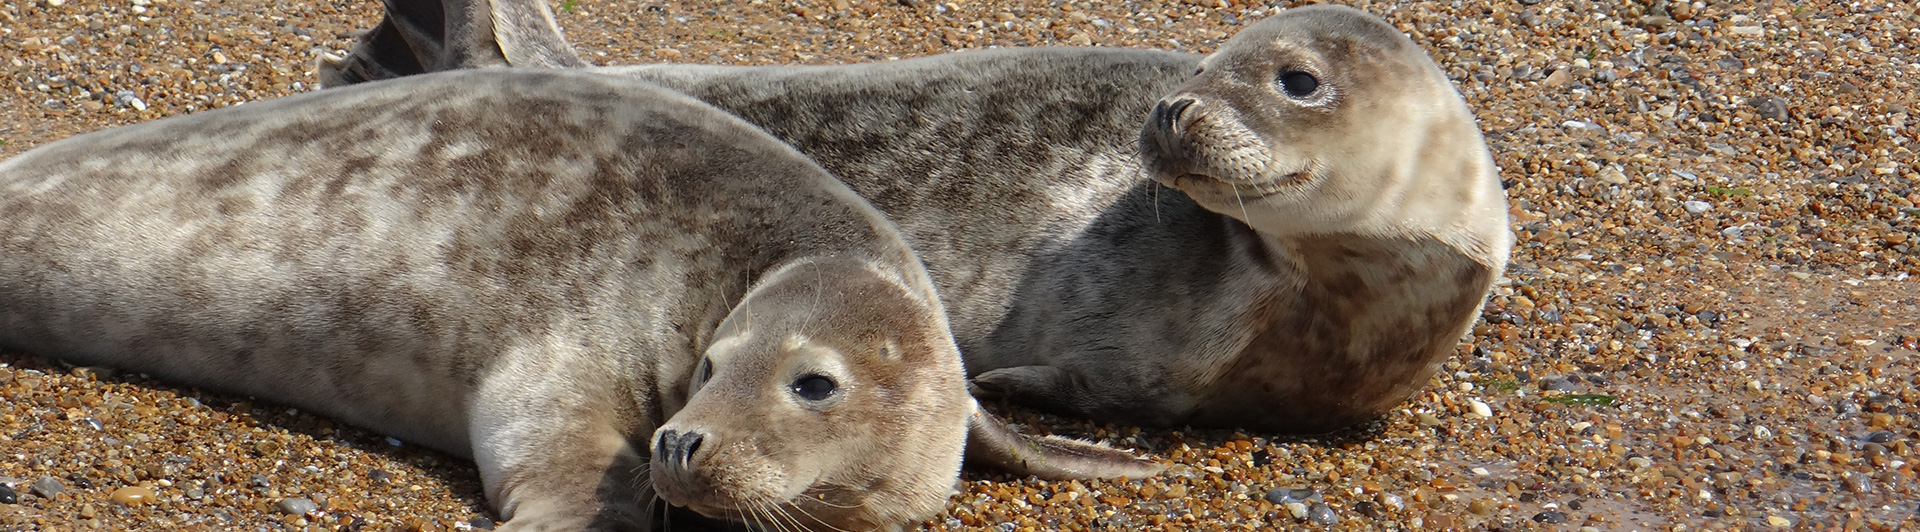 Pair of young seal pups hauled out on the beach